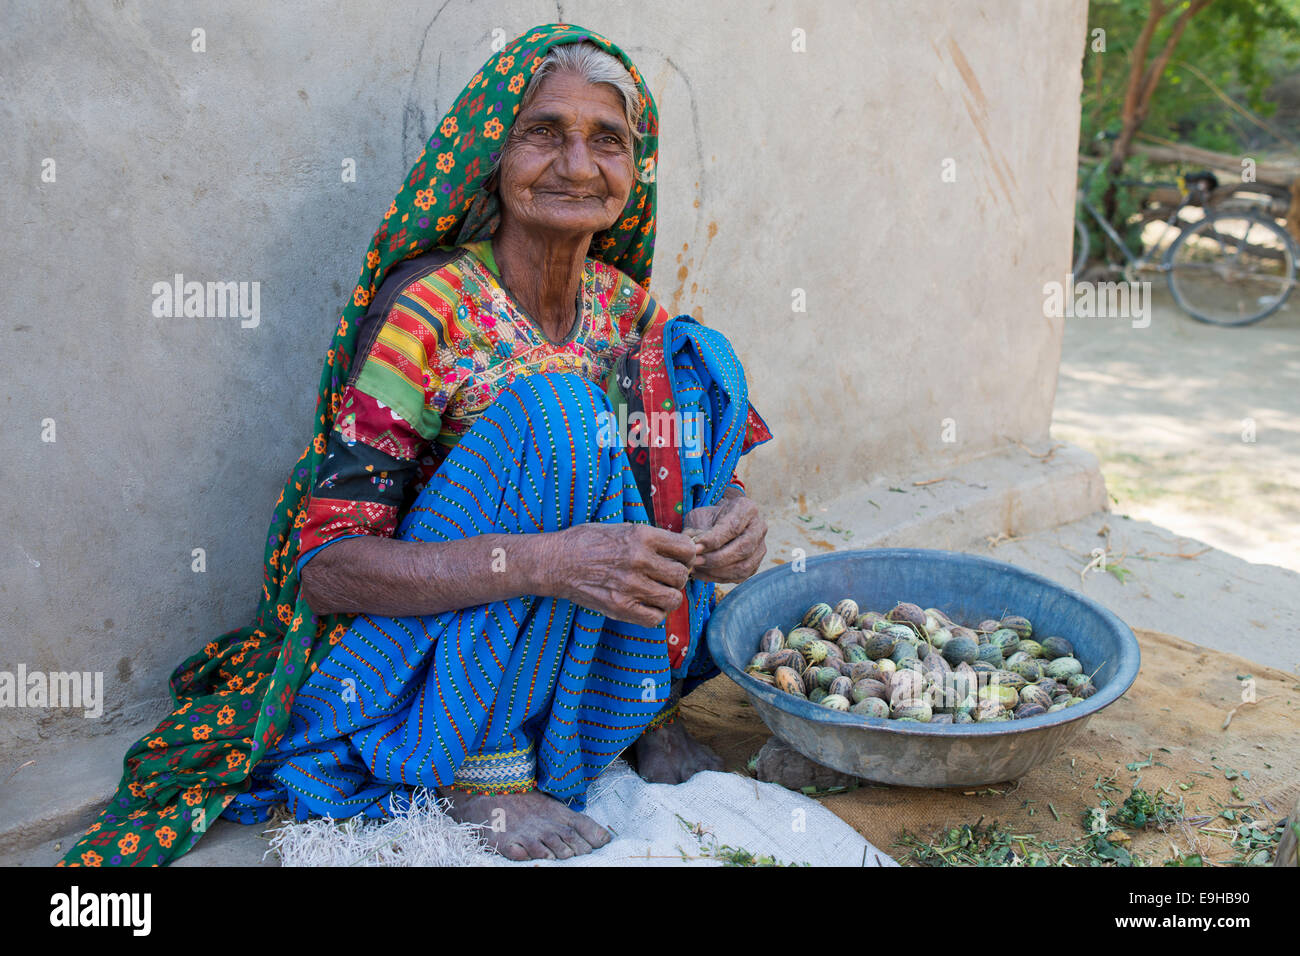 A friendly elderly woman in traditional dress sitting on the ground sorting small melons, Rann of Kutch, Gujarat, India Stock Photo